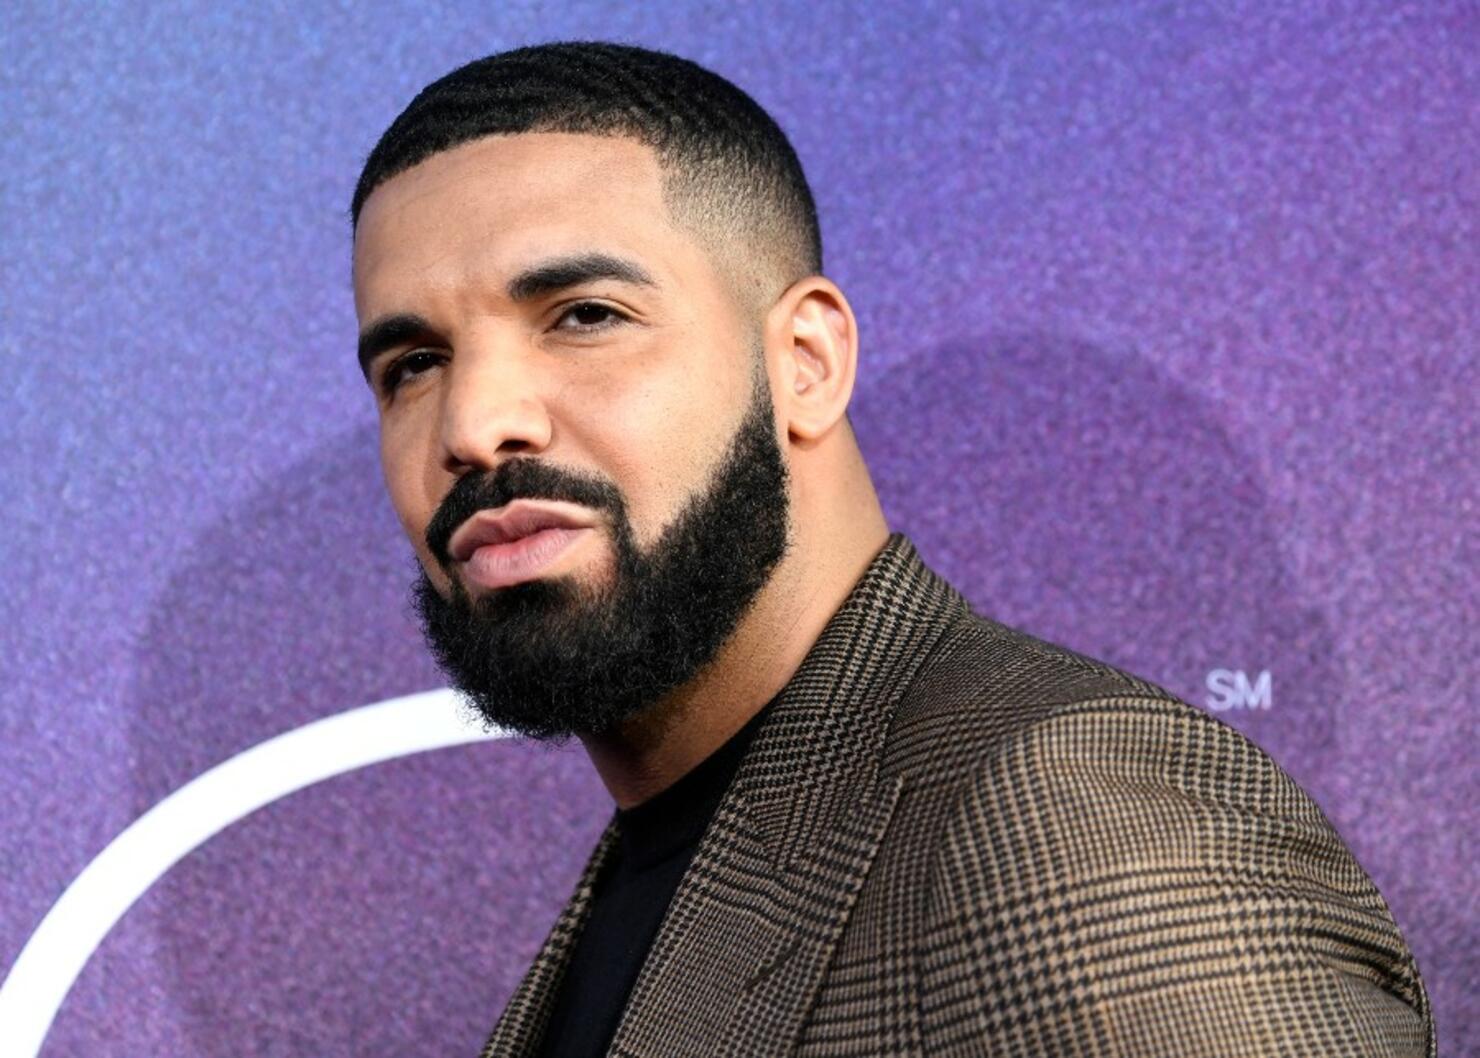 Drake Gets a Photorealistic Tattoo to Honor the Late Virgil Abloh